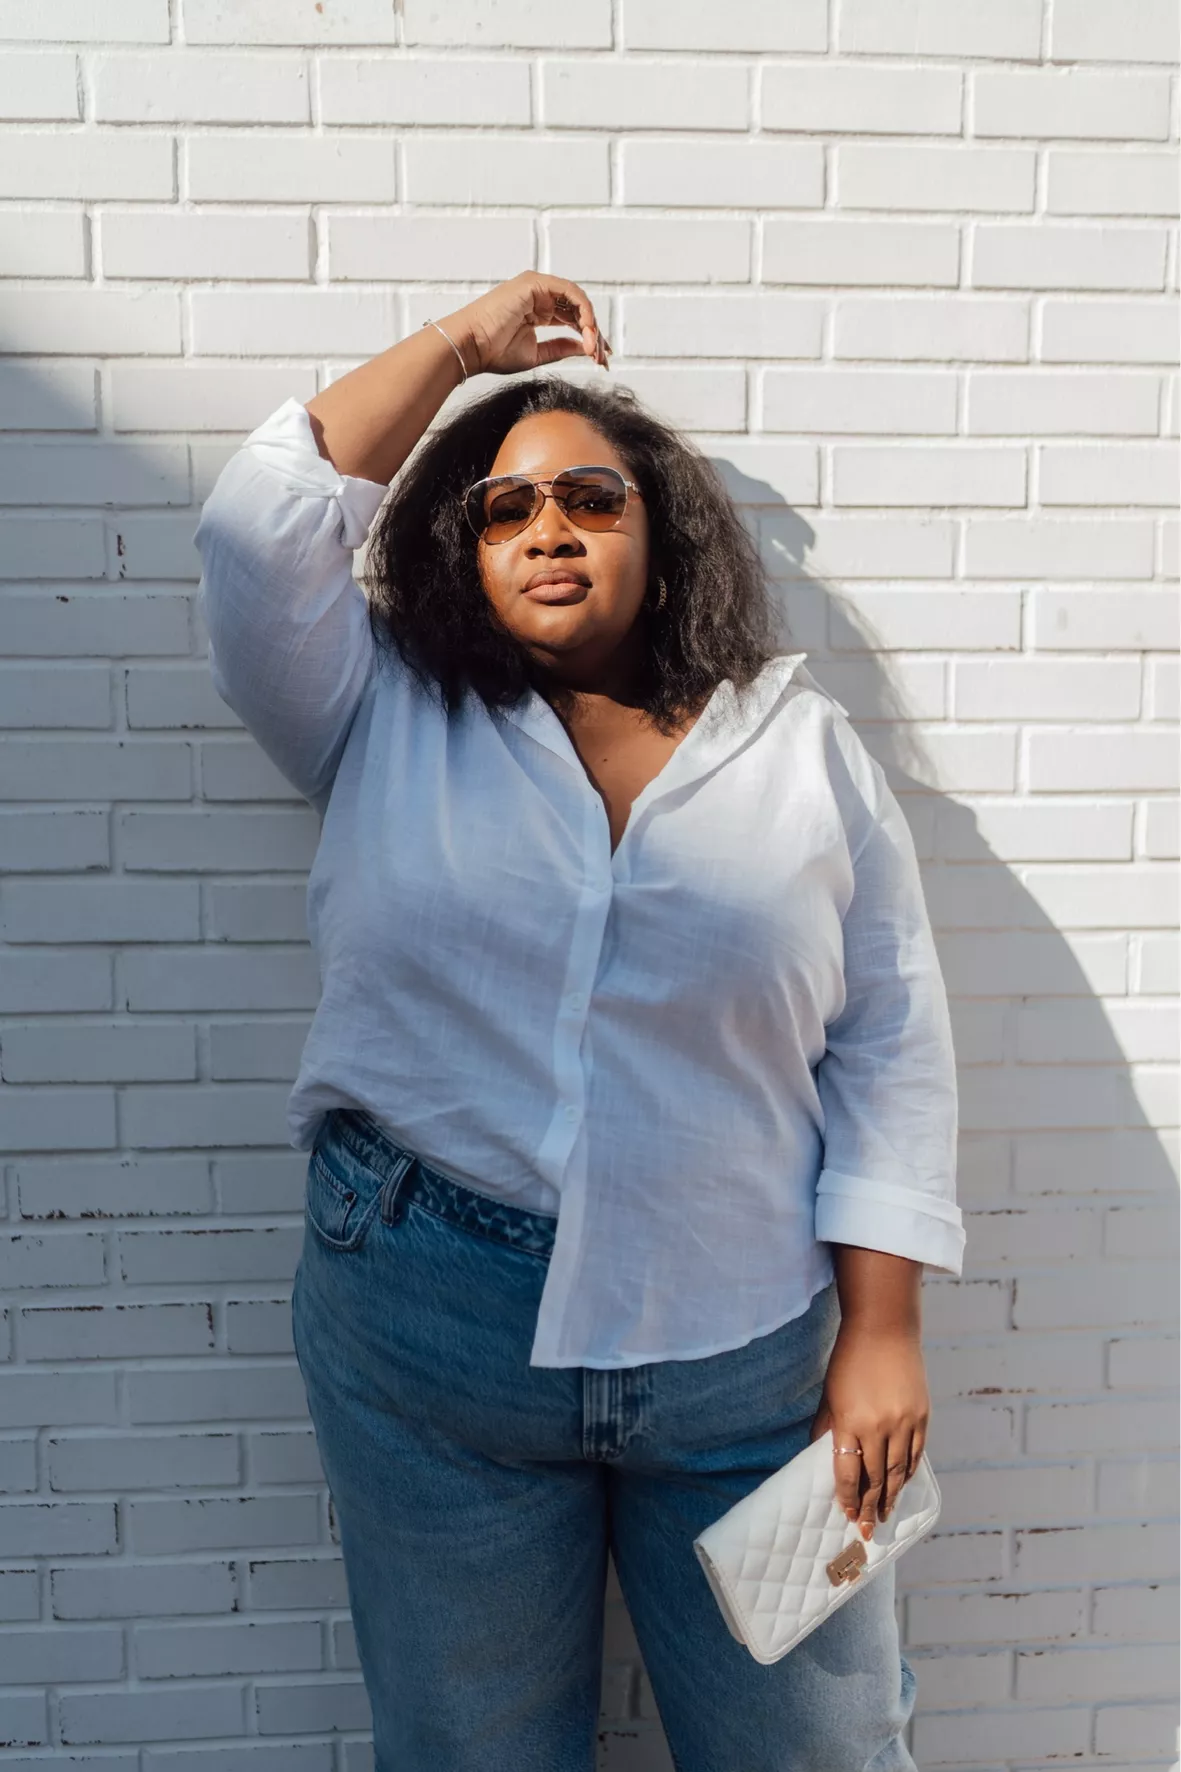 Wardrobe Essentials For Plus Size Women That Are NOT Boring